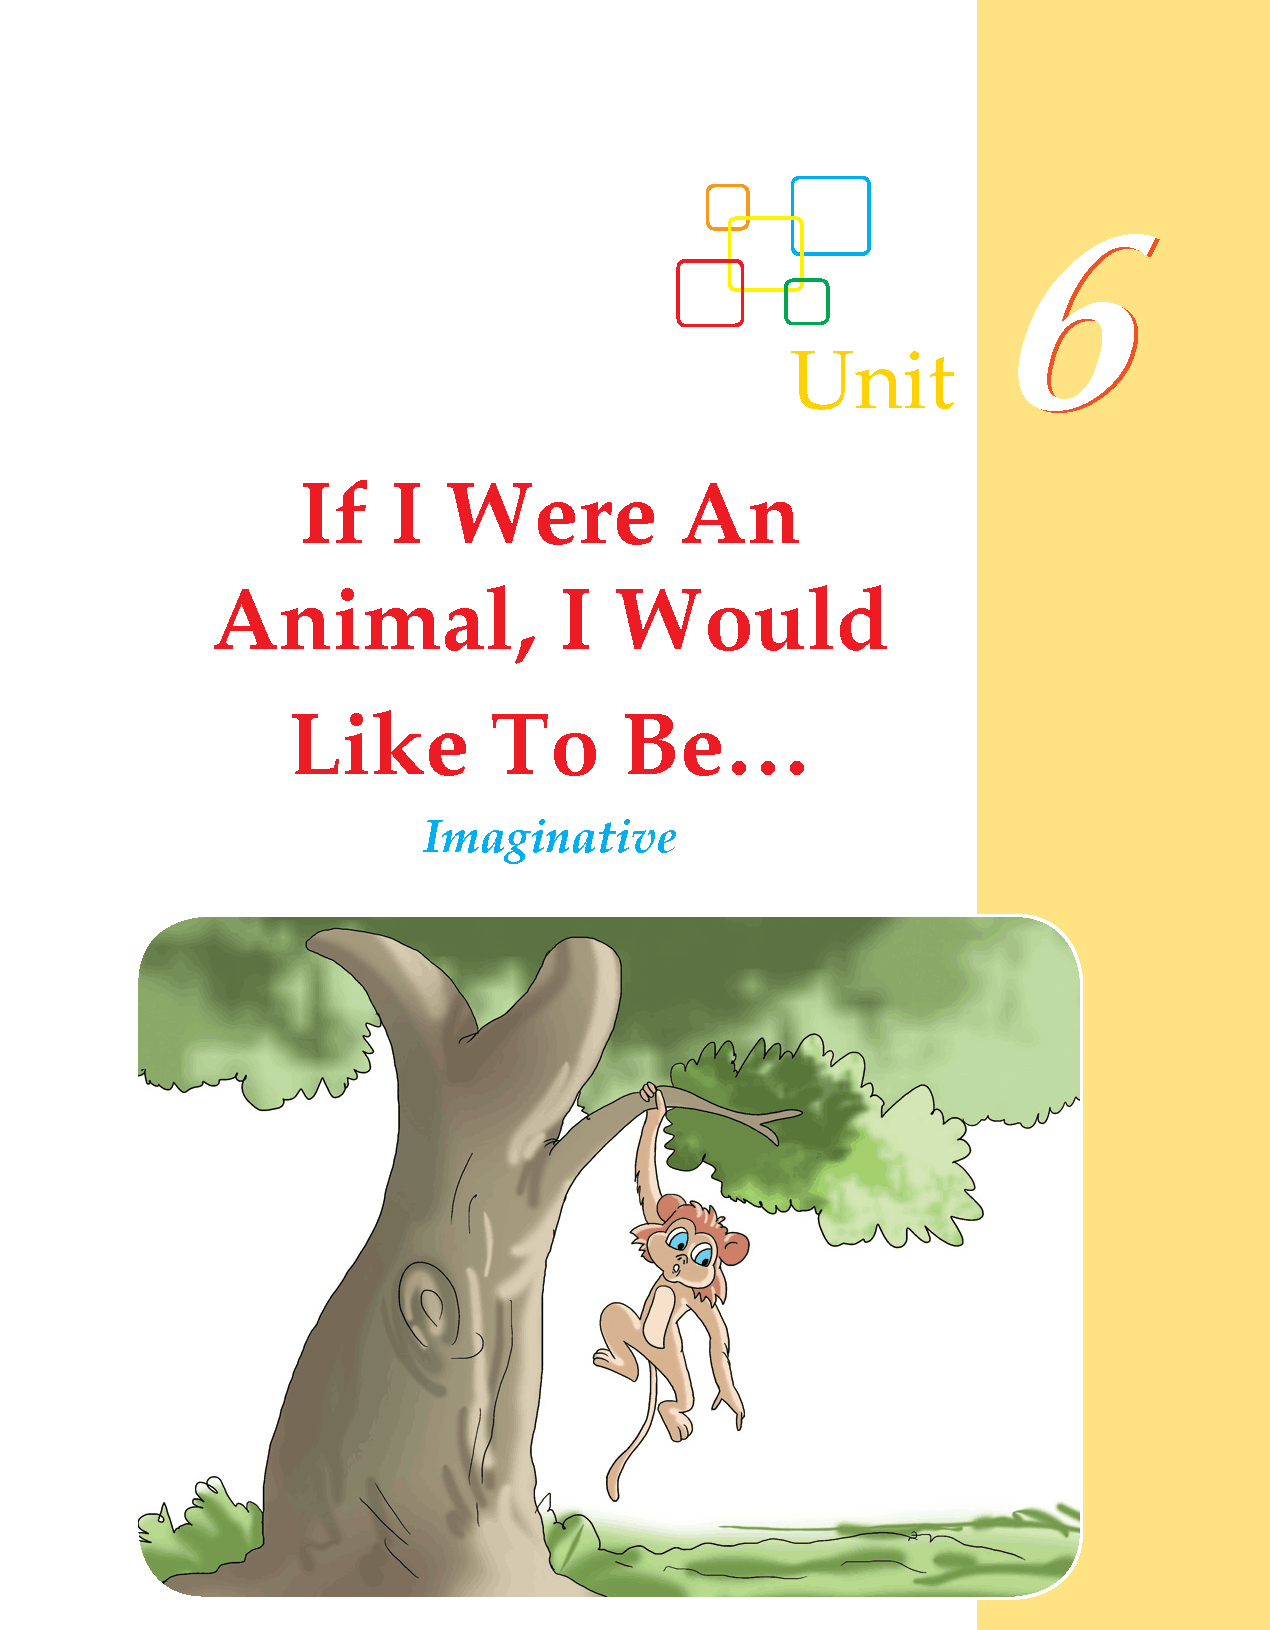 Grade 3 Imaginative Essay If I Were An Animal, I Would Like To Be… |  Composition Writing Skill